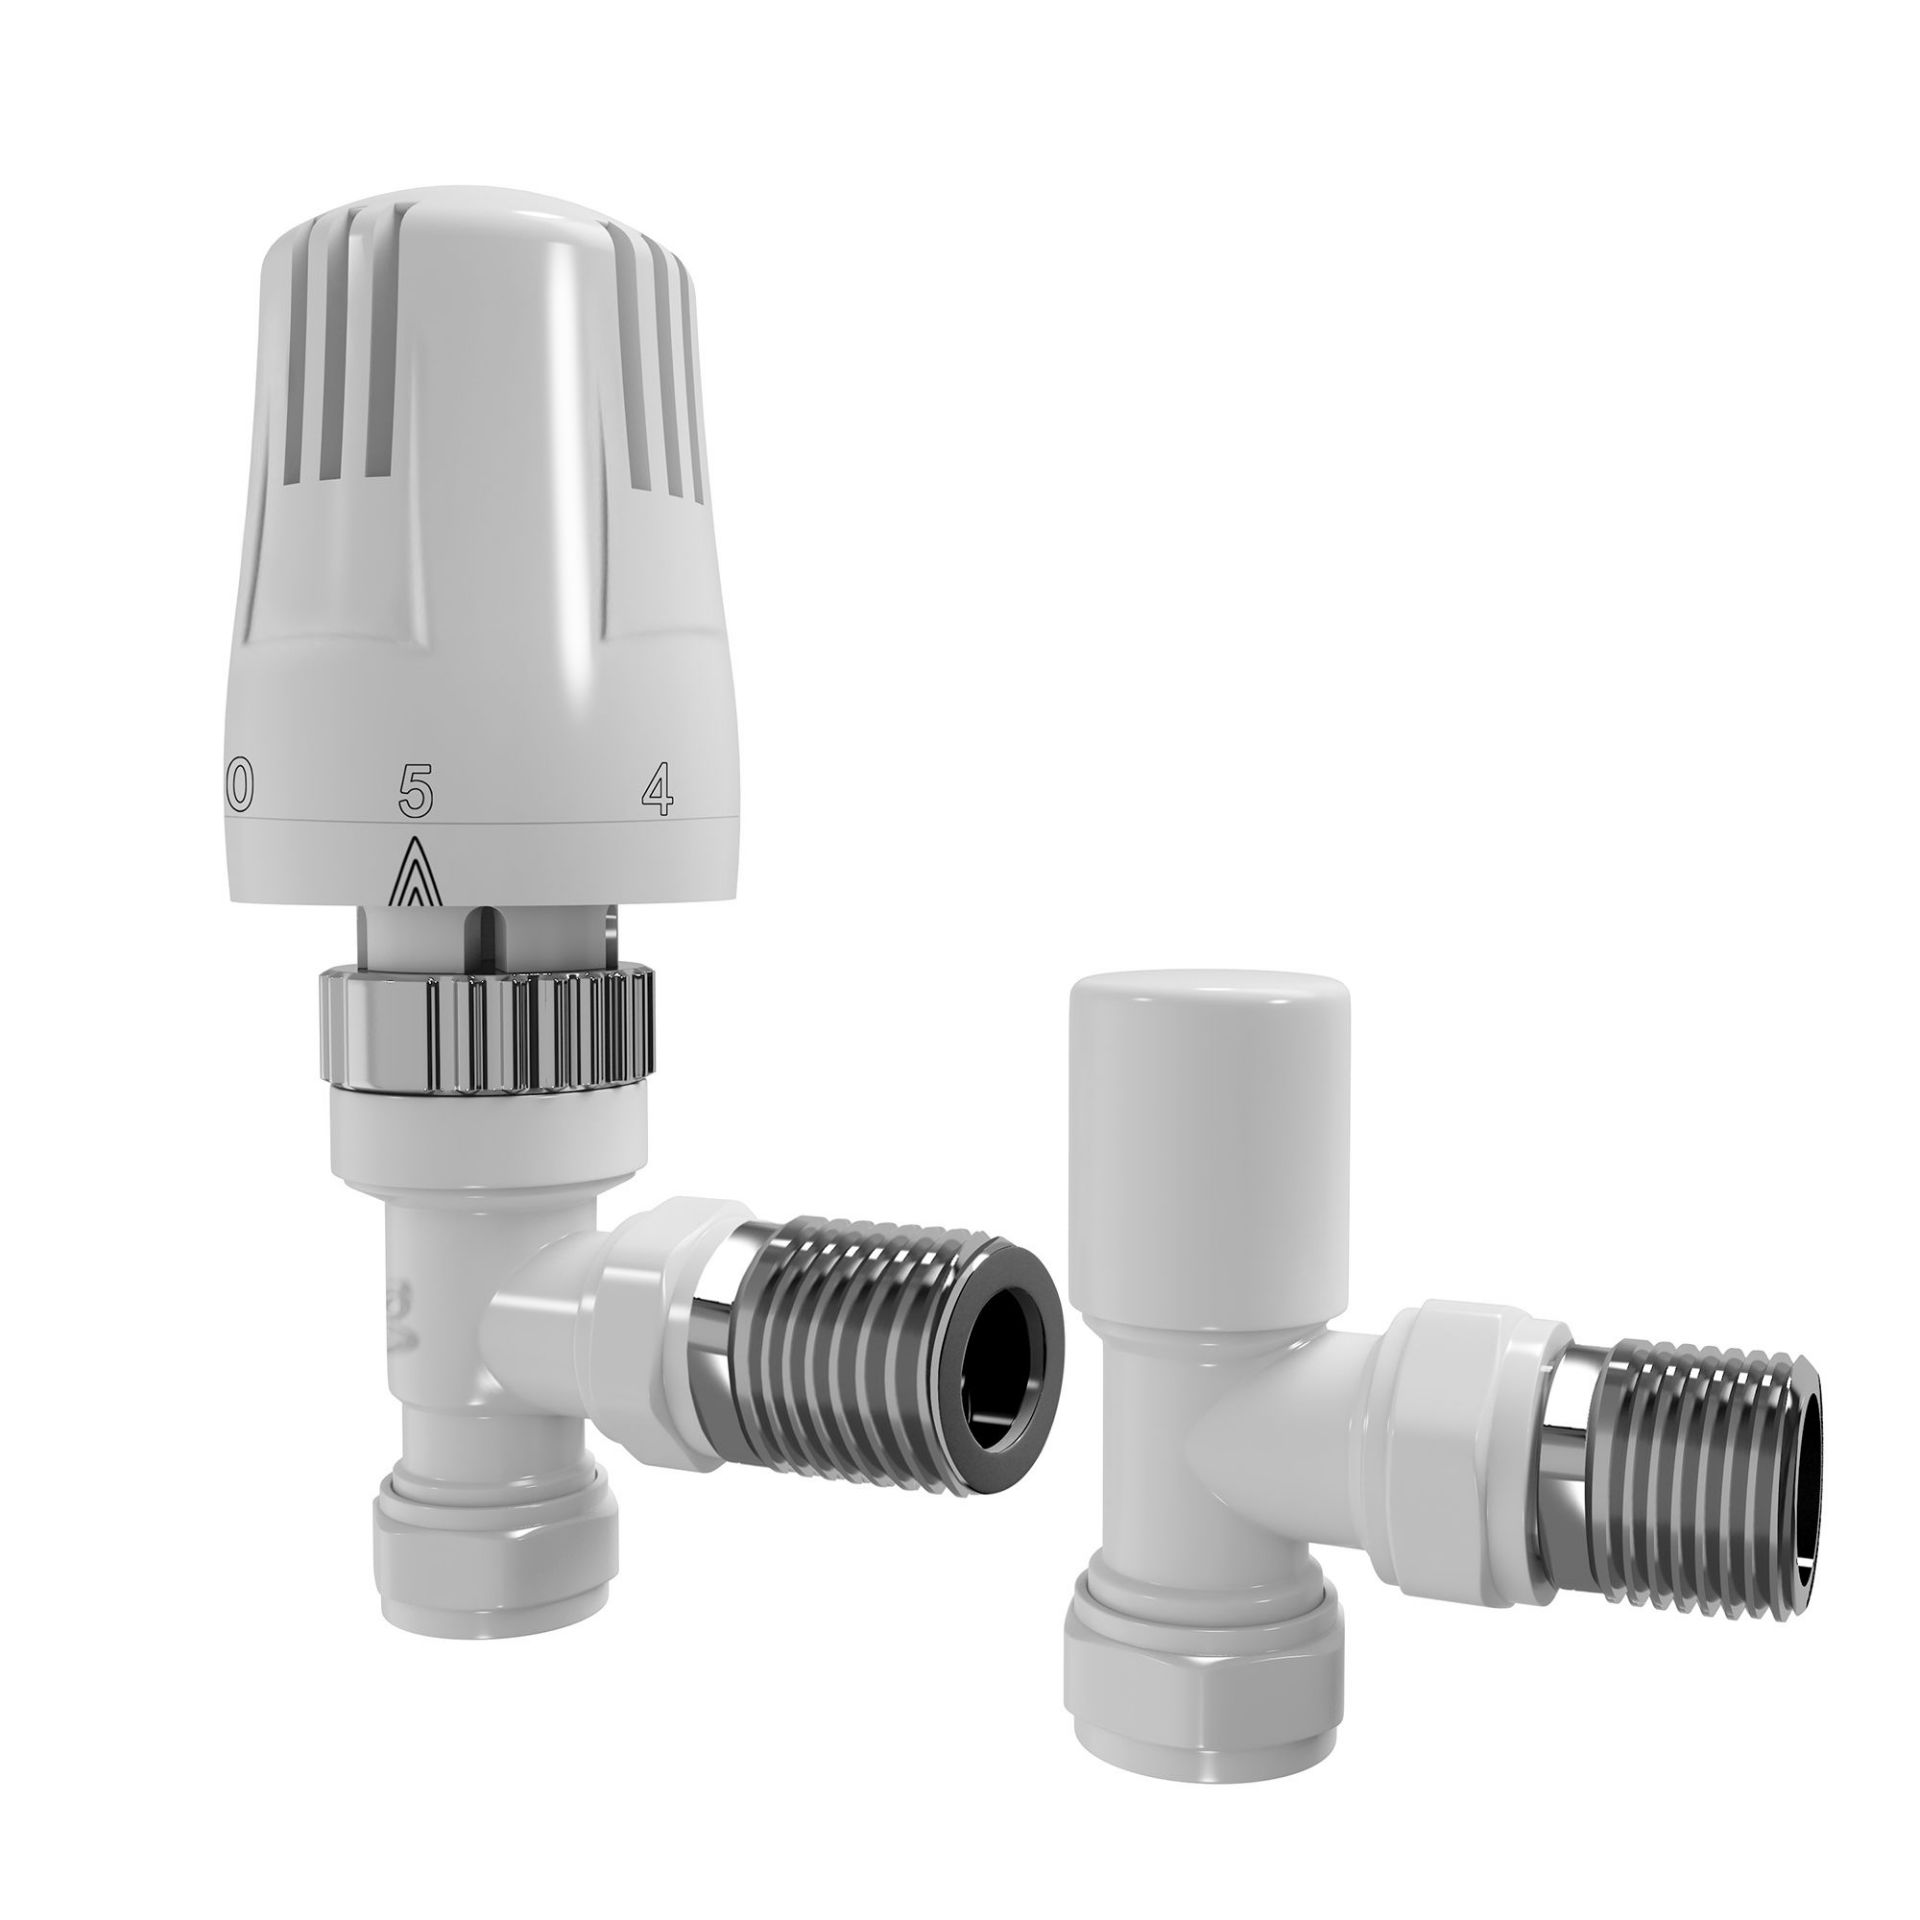 (NF135) 15mm Standard Connection Thermostatic Angled Gloss White Radiator Valves Solid brass